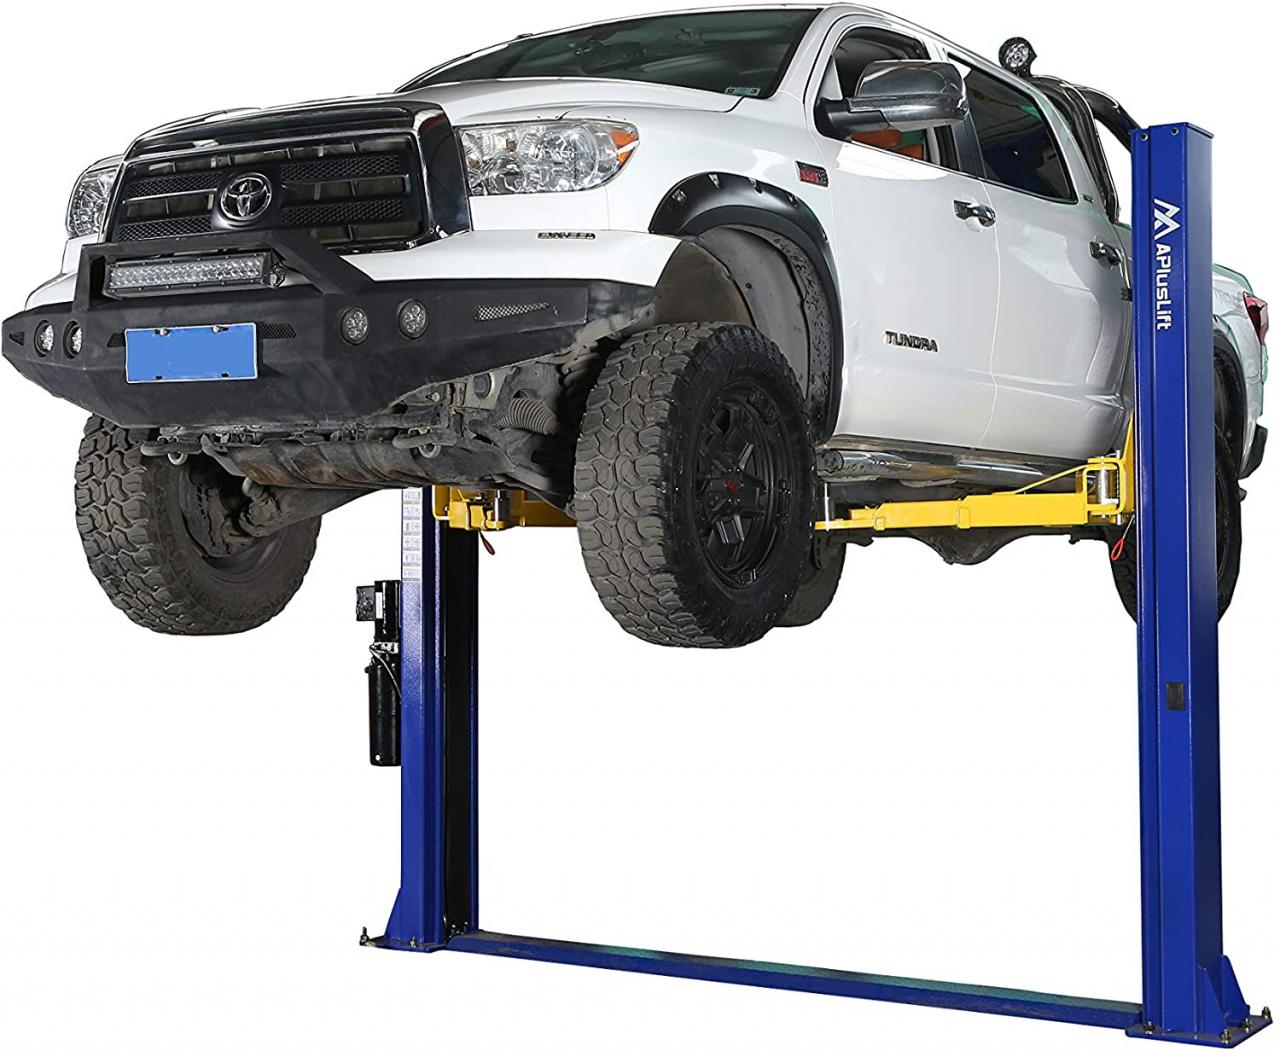 Top 10 best clearfloor lifts for garage in 2018 reviews